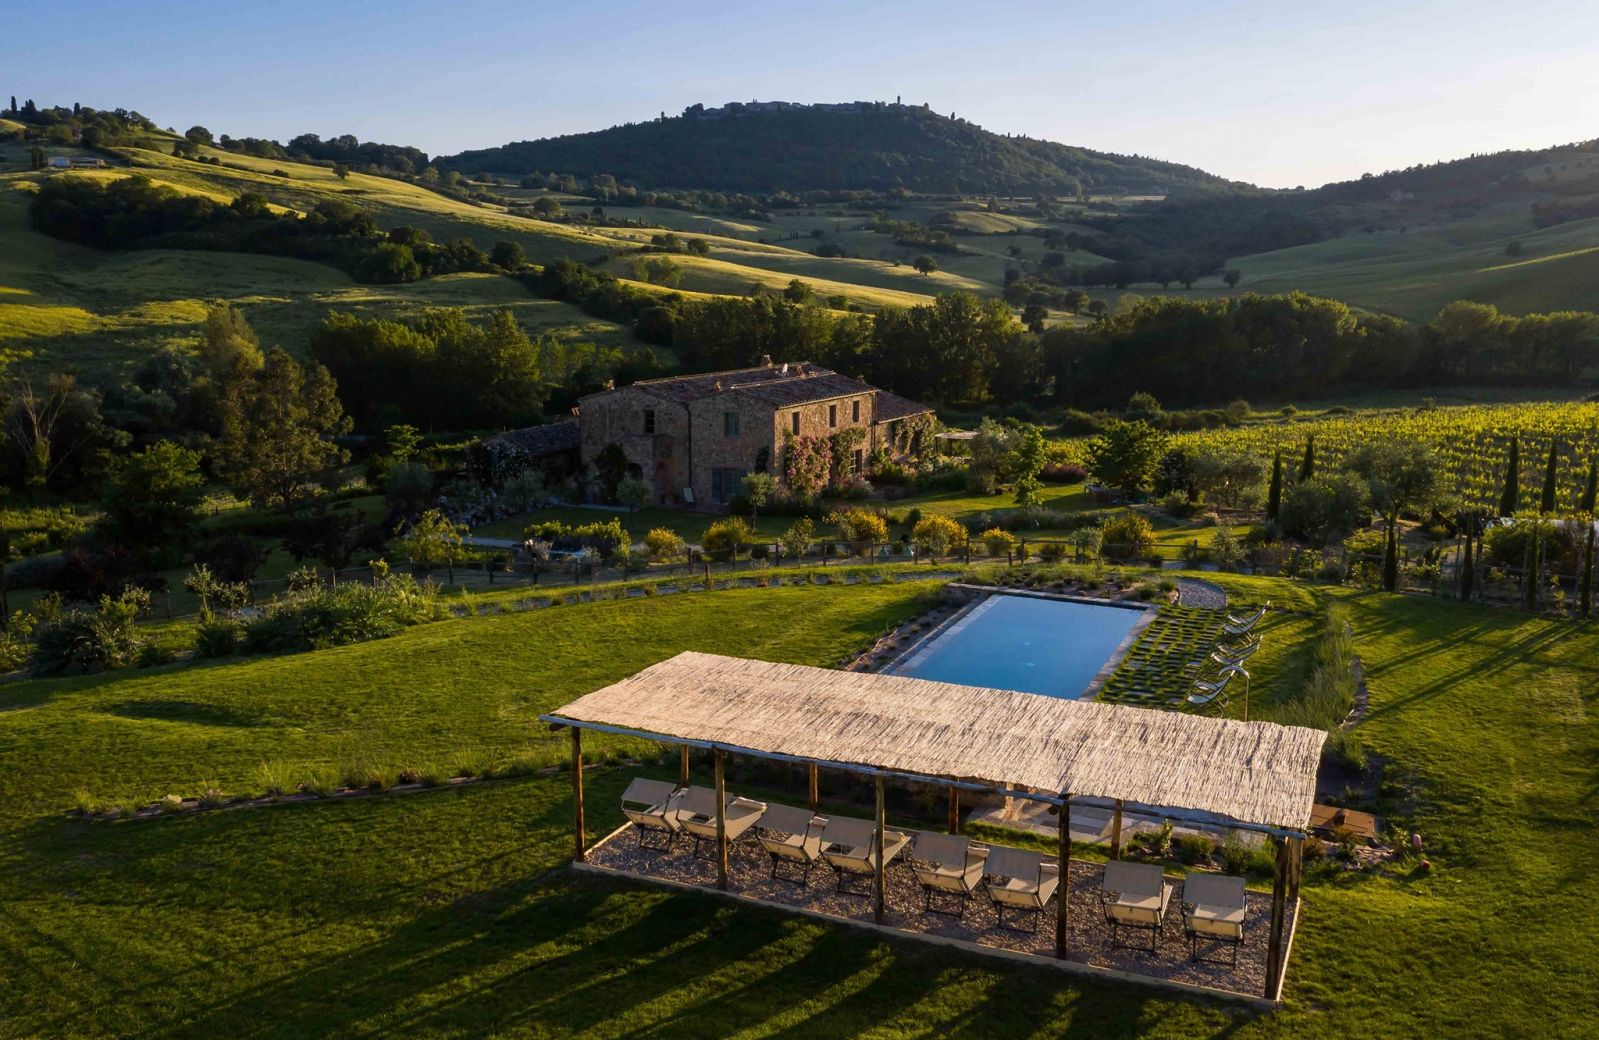 FOLLONICO B&B is a romantic, boutique guesthouse in Montefollonico, Tuscany